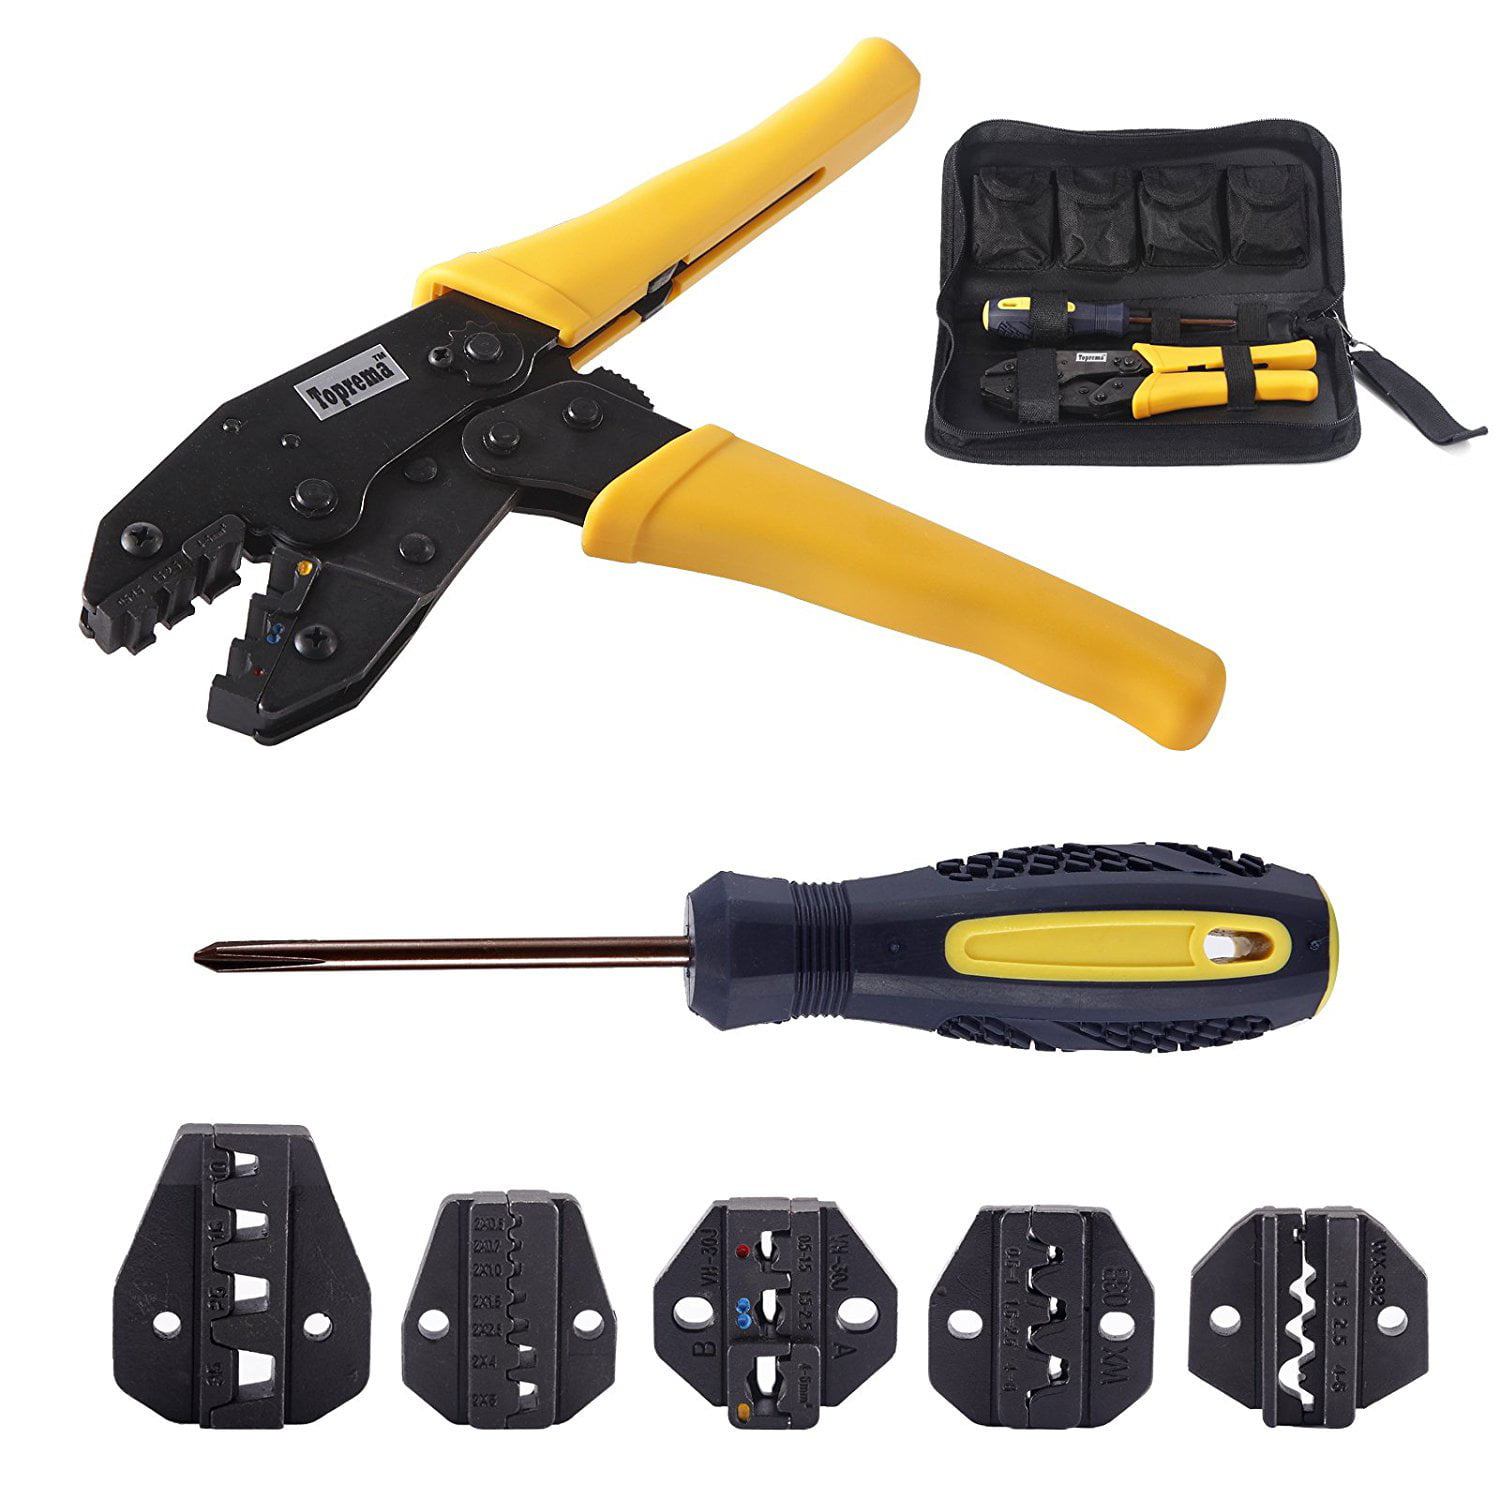 PROFESSIONAL RATCHET ELECTRICAL TERMINAL CRIMPING KIT 5 INTERCHANGEABLE HEADS 